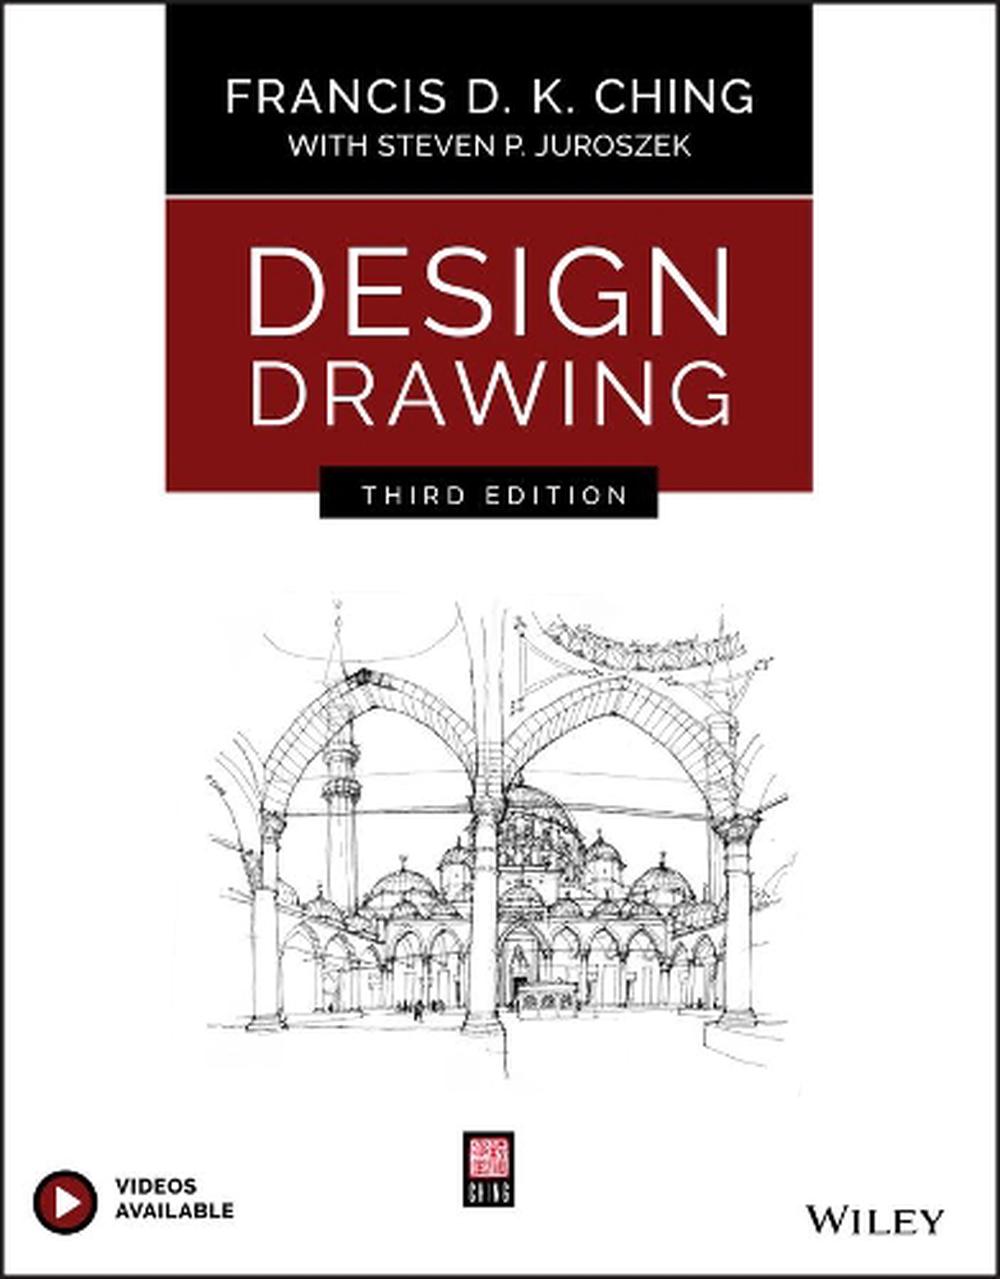 Design Drawing 3rd Edition by Francis D.K. Ching (English) Paperback